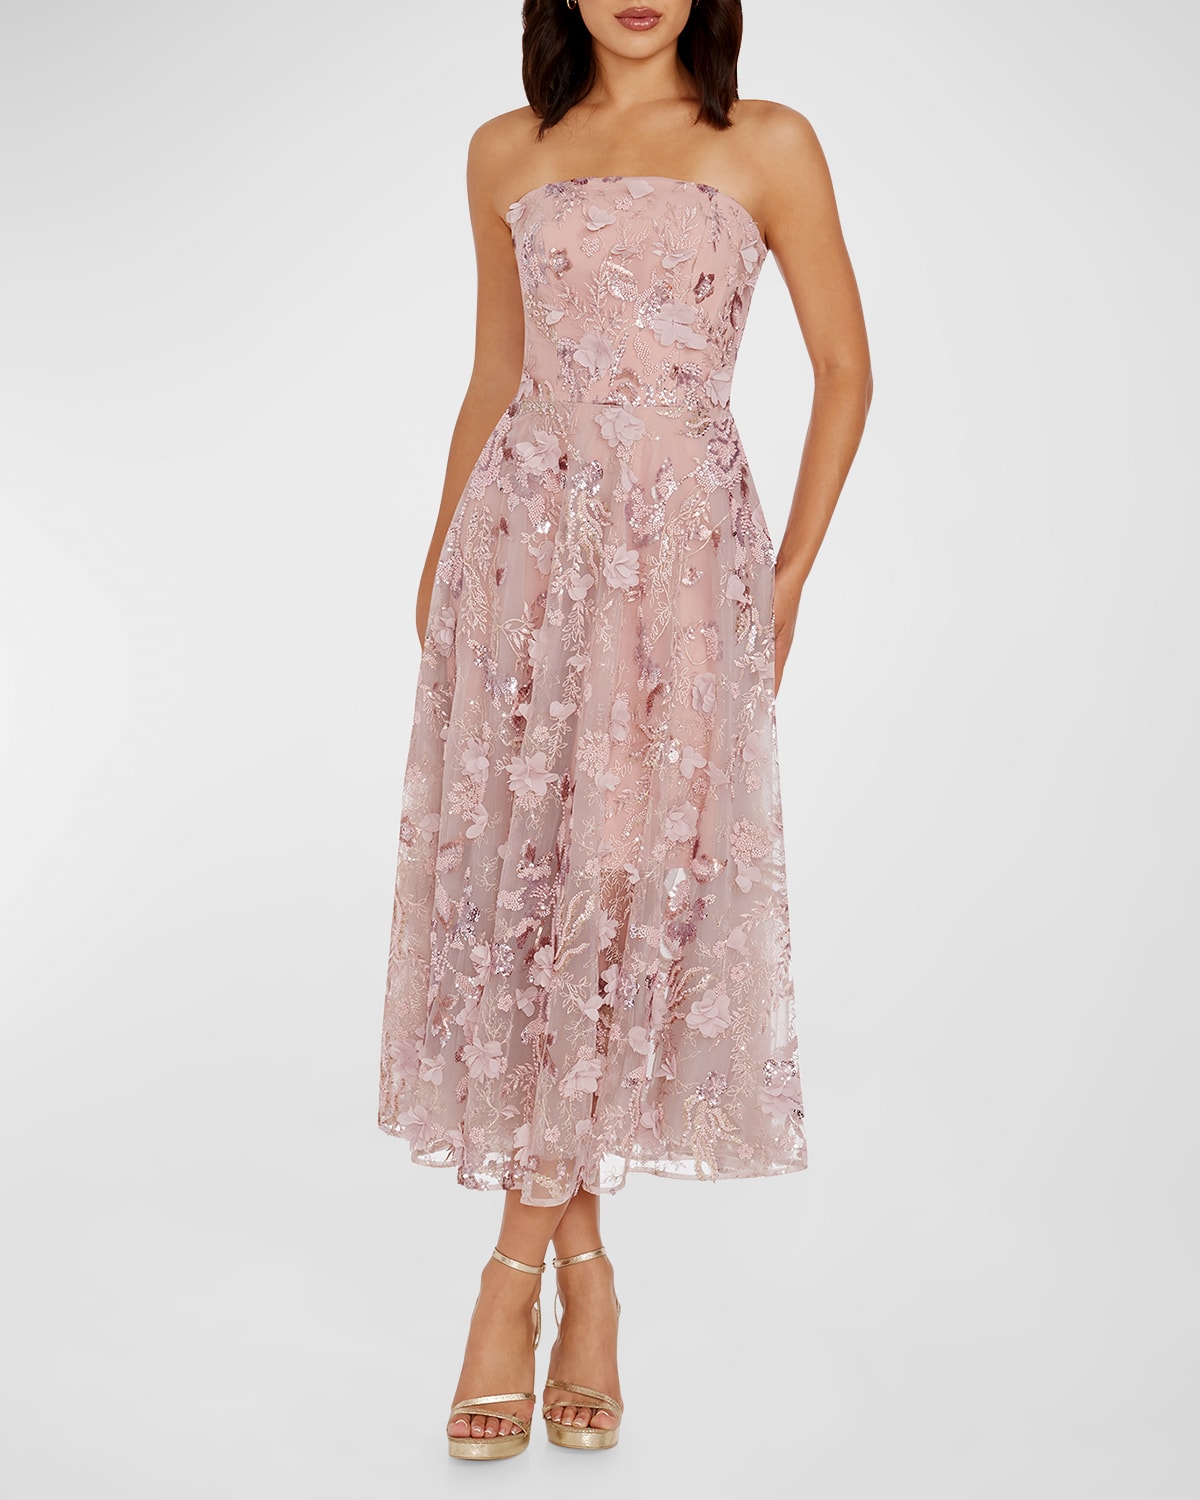 Dress The Population Black Label Kailyn Beaded Floral-embroidered Midi Dress In Blush Multi